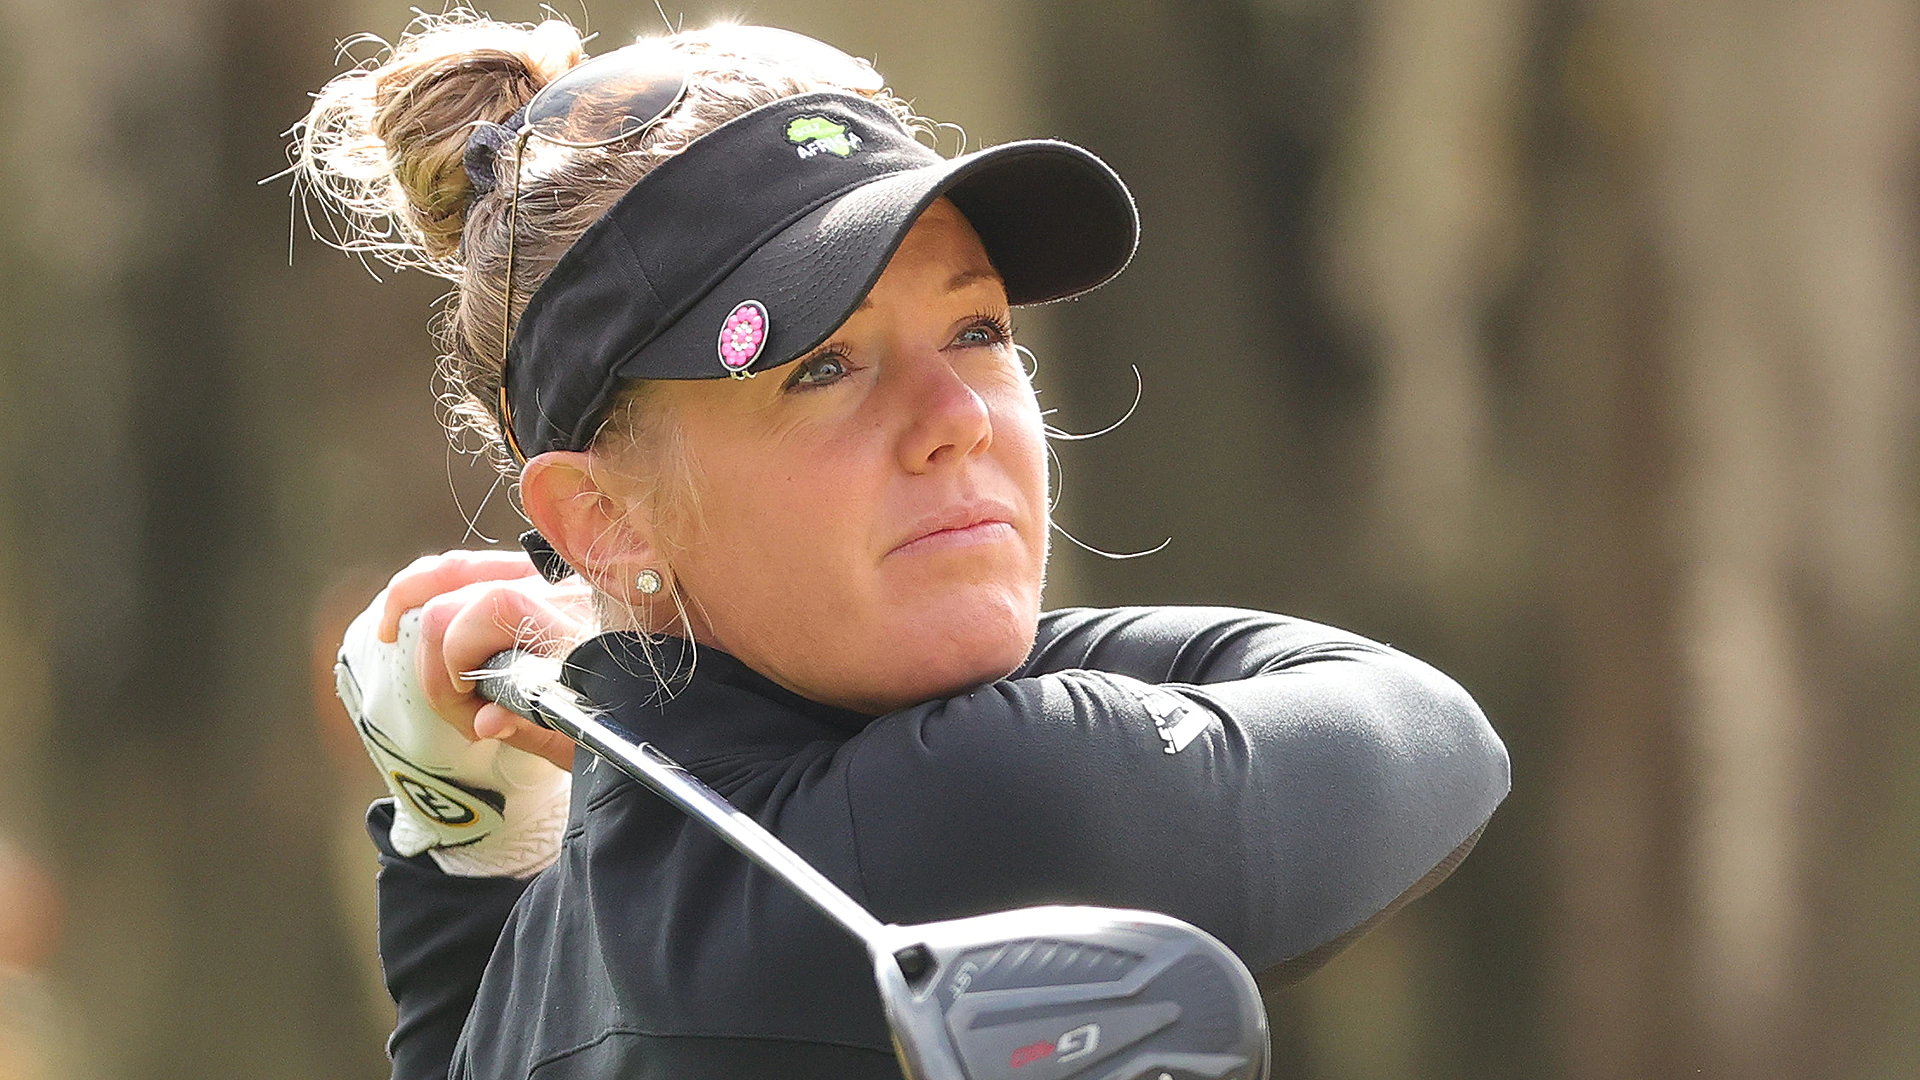 Amy Olson dealing with tragic family loss ahead of USWO final round